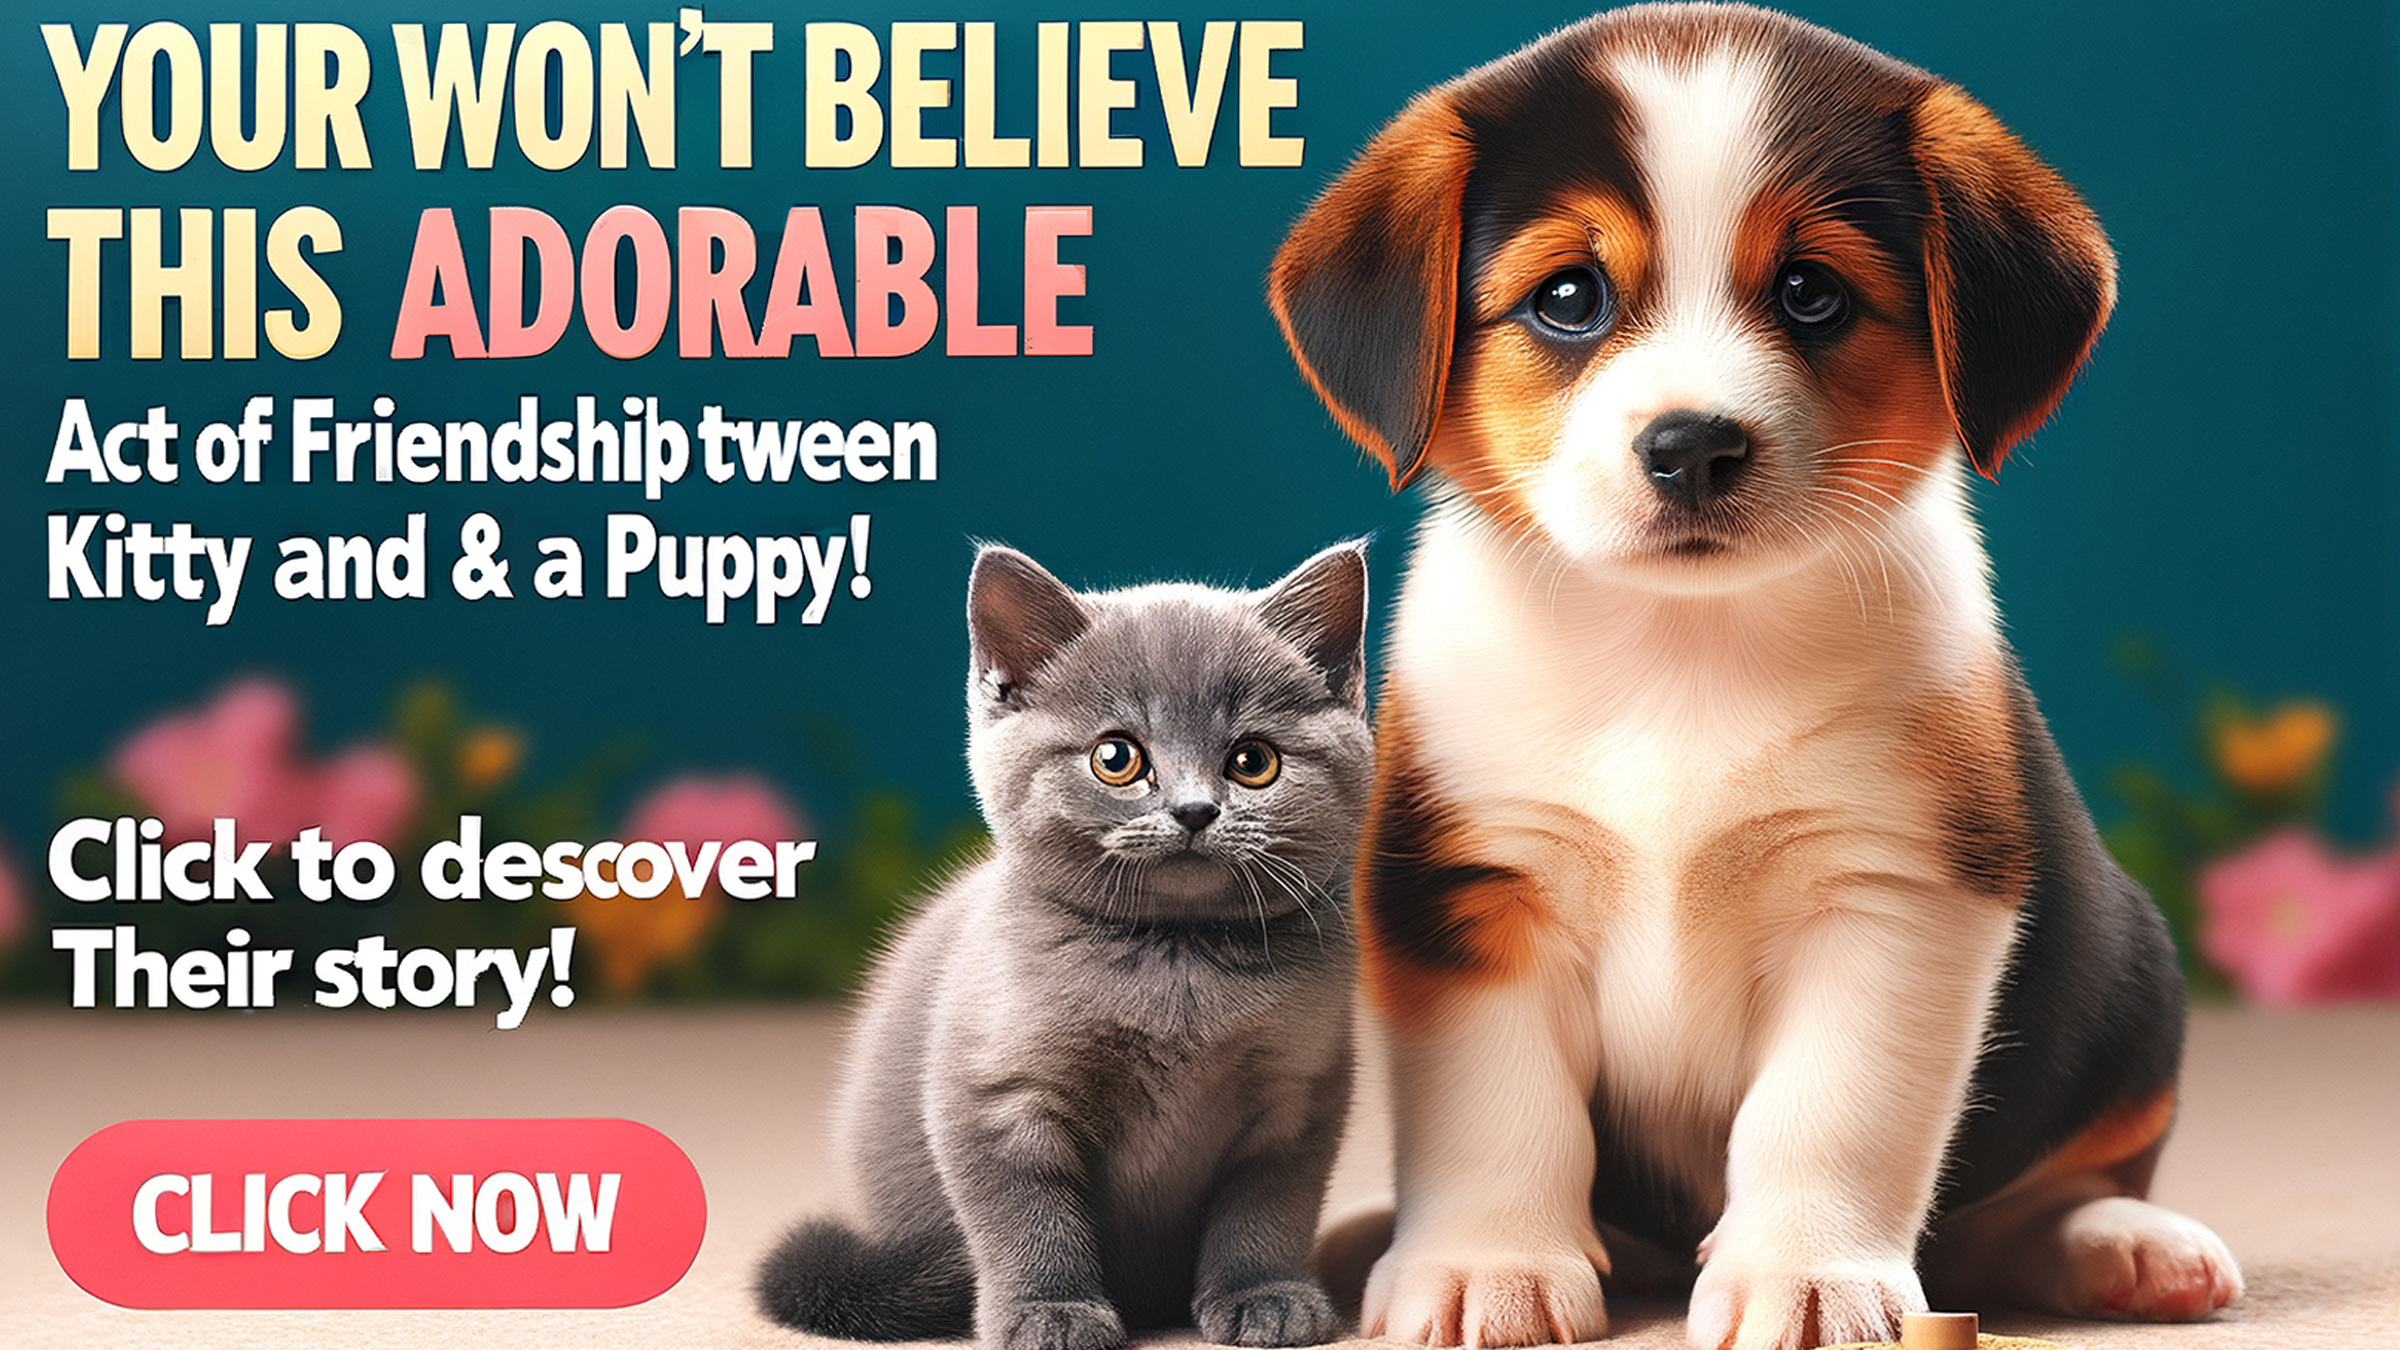 AI-generated image of a kitten and puppy in a clickbait ad, illustration